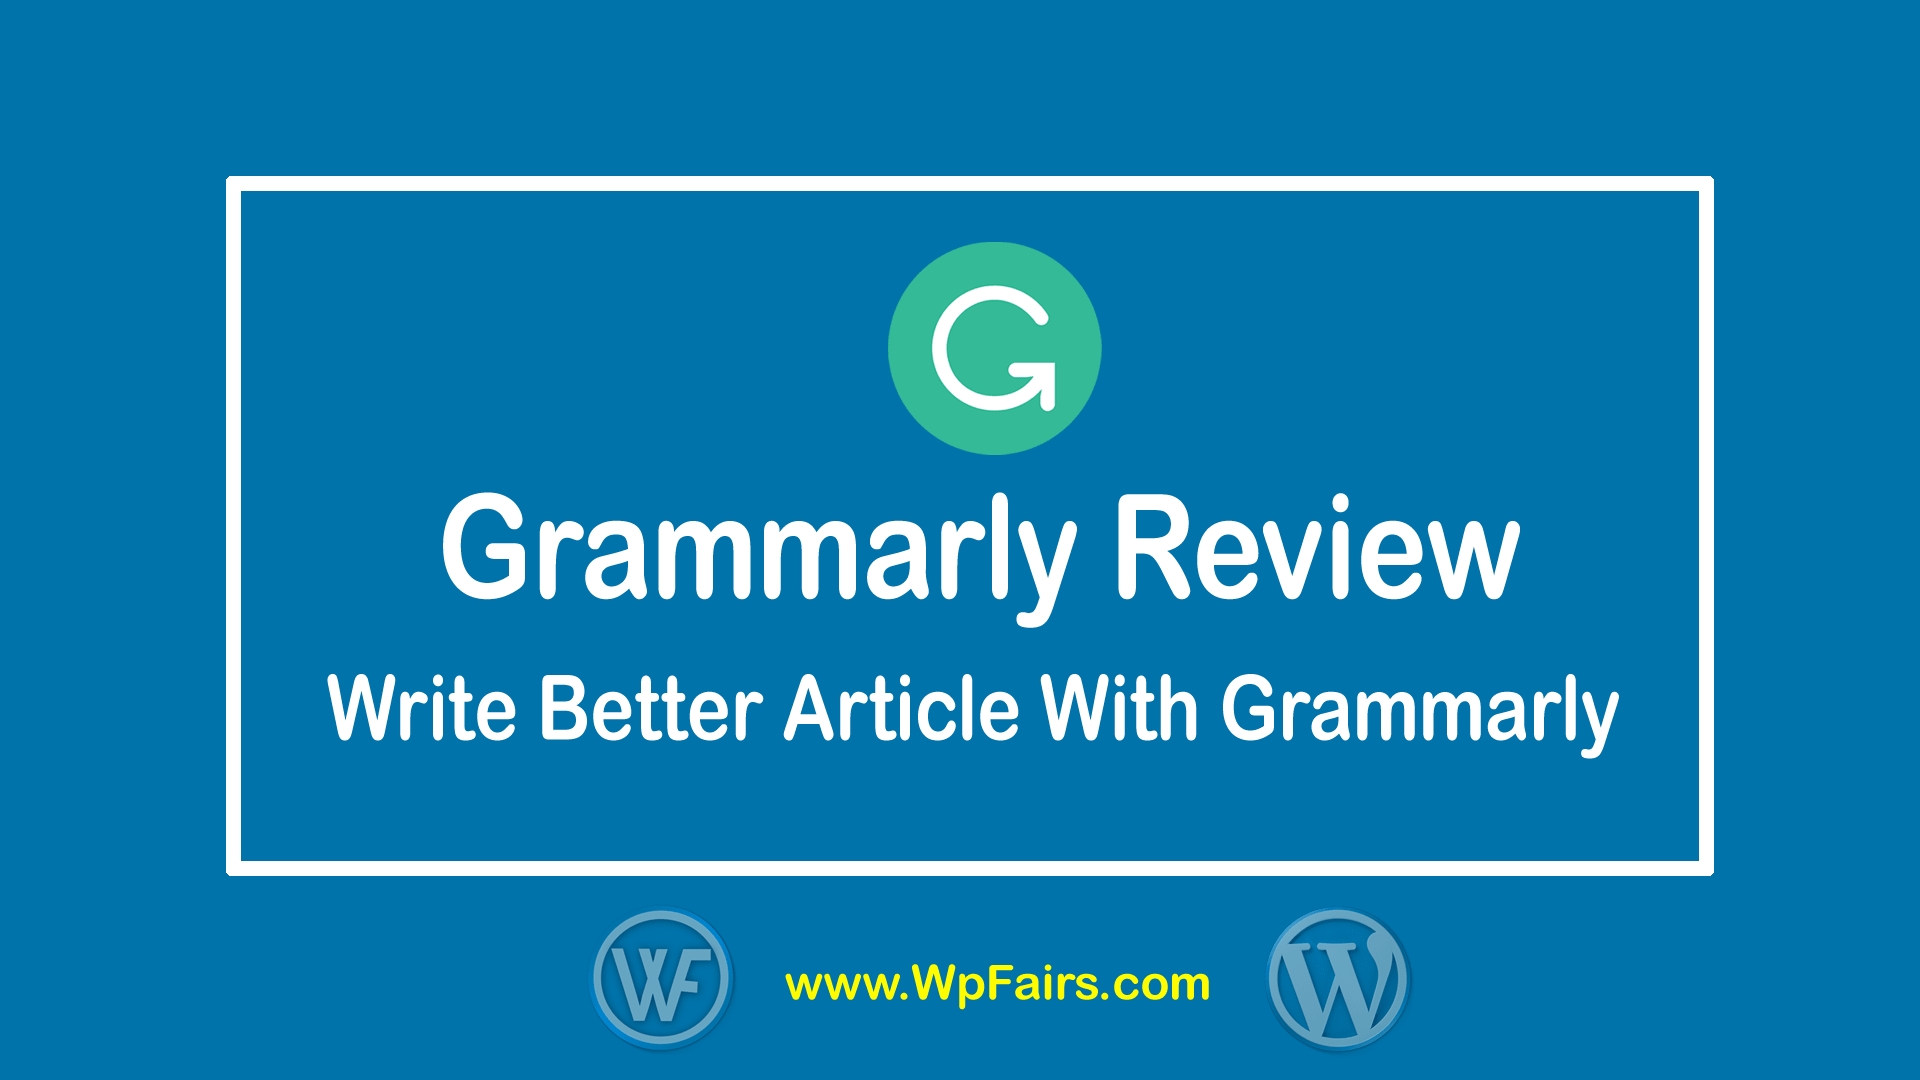 Grammarly Review - Write Better Article With Grammarly - WpFairs